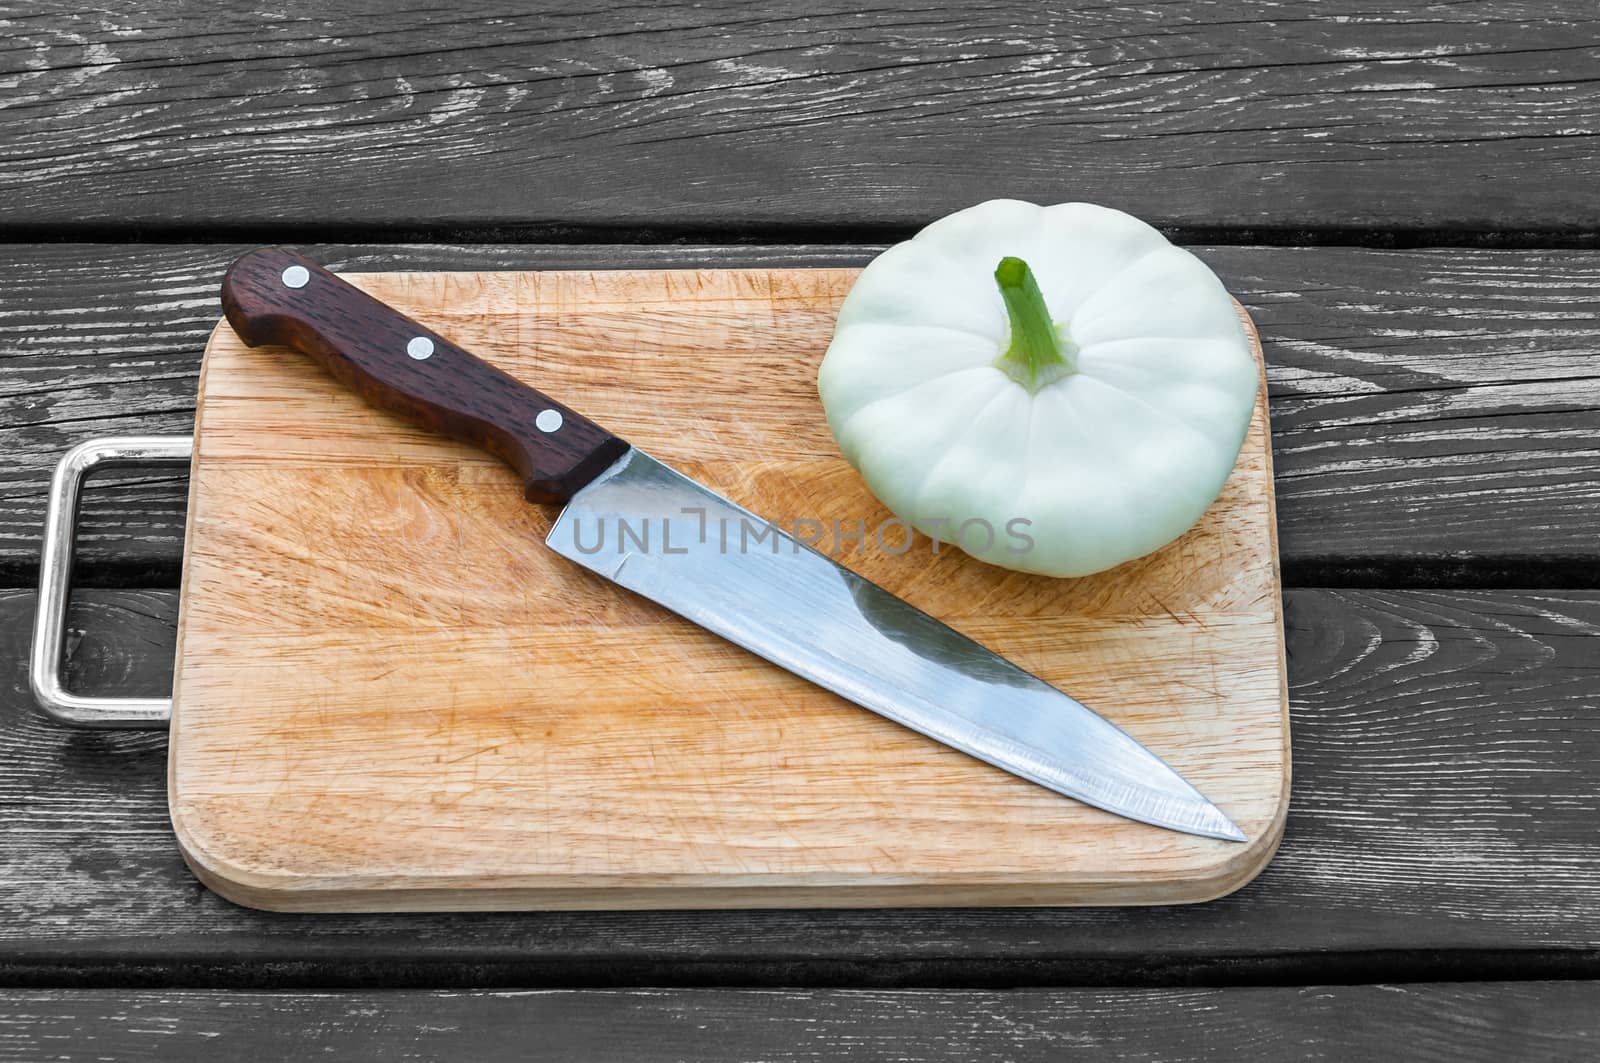 Squash on a cutting board  wooden background with  steel knif by zeffss